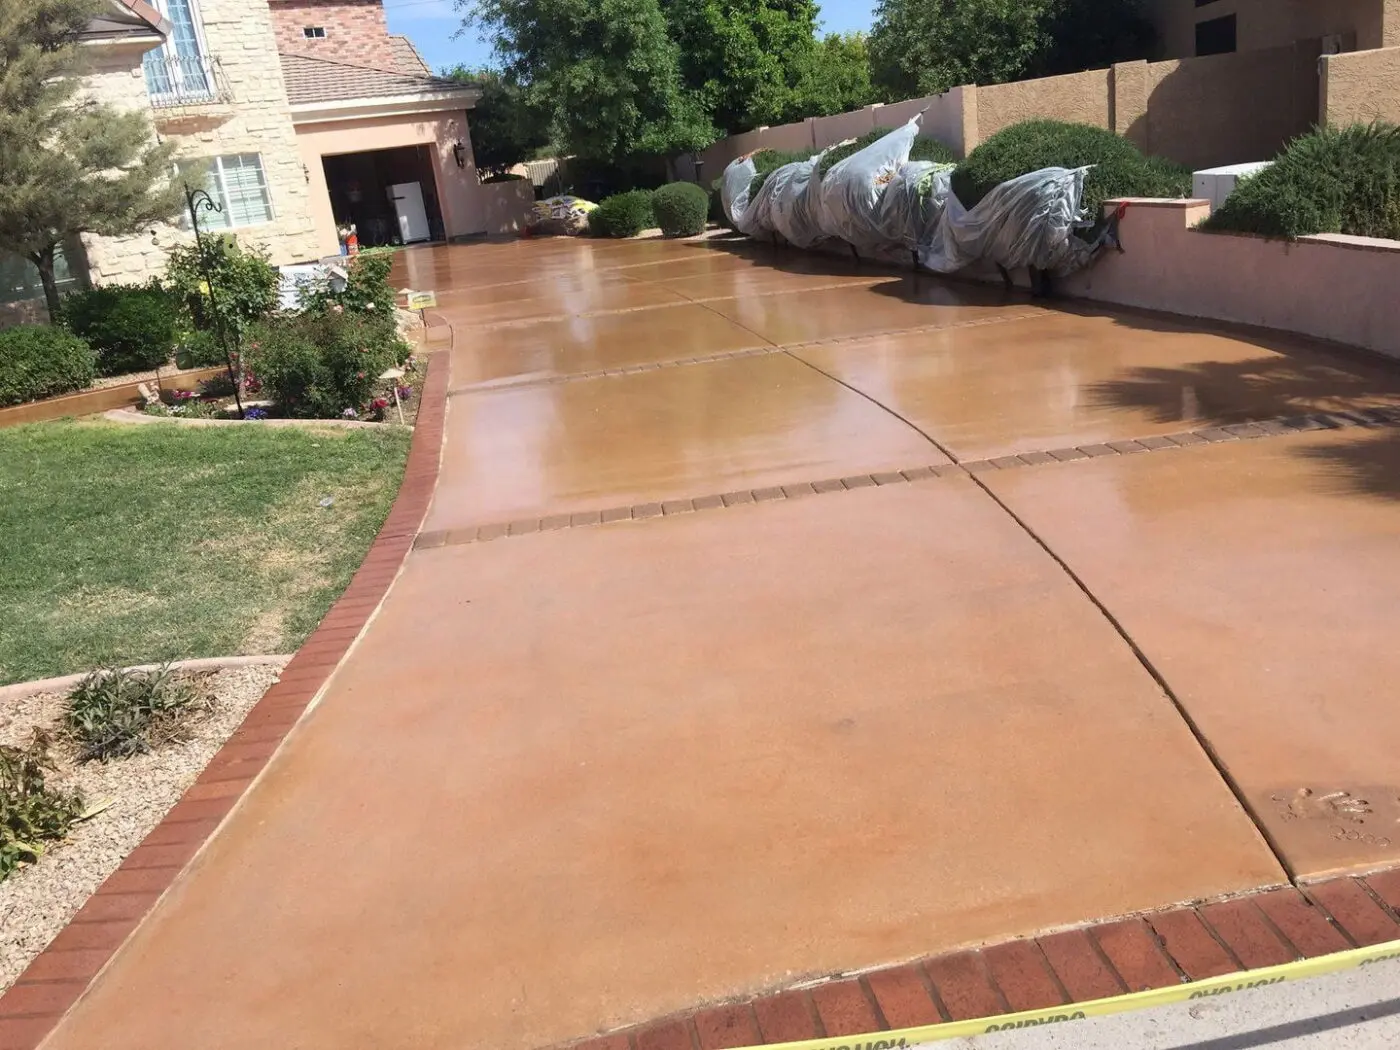 A long, smooth driveway with a freshly-applied light brown coating by Reno Concrete Solutions leads to a garage. Brick borders line the edges of the driveway. A grassy lawn with shrubs and flowers is on one side, while covered bushes rest against a tan wall on the other in Genoa, NV.